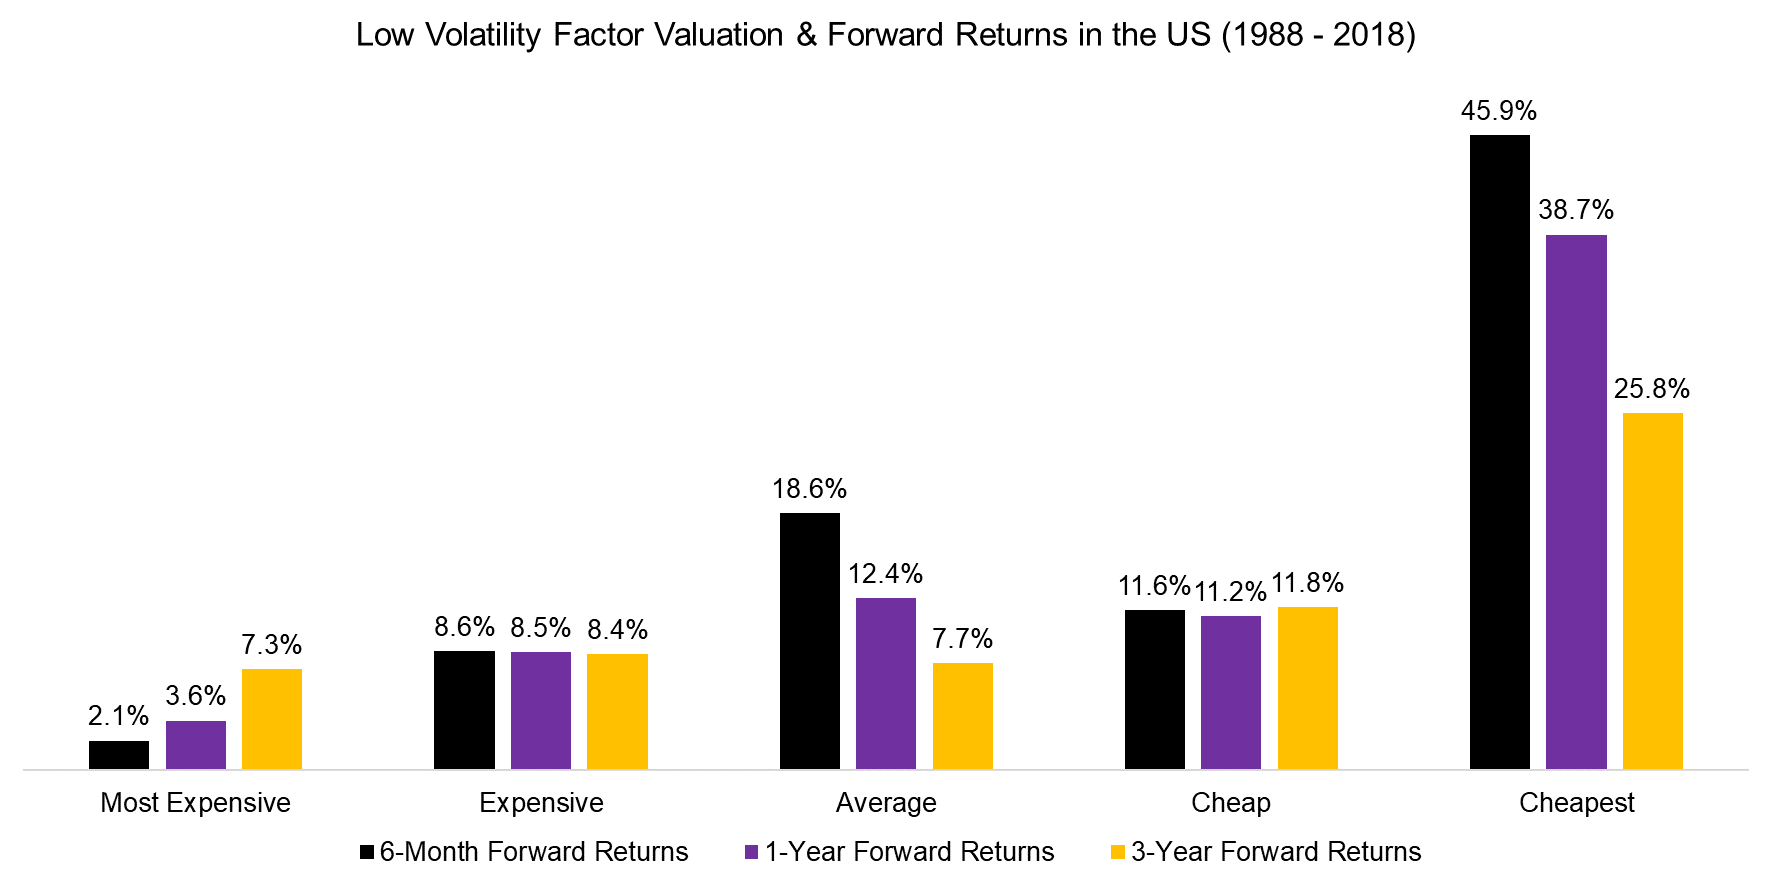 Low Volatility Factor Valuation & Forward Returns in the US (1988 - 2018)